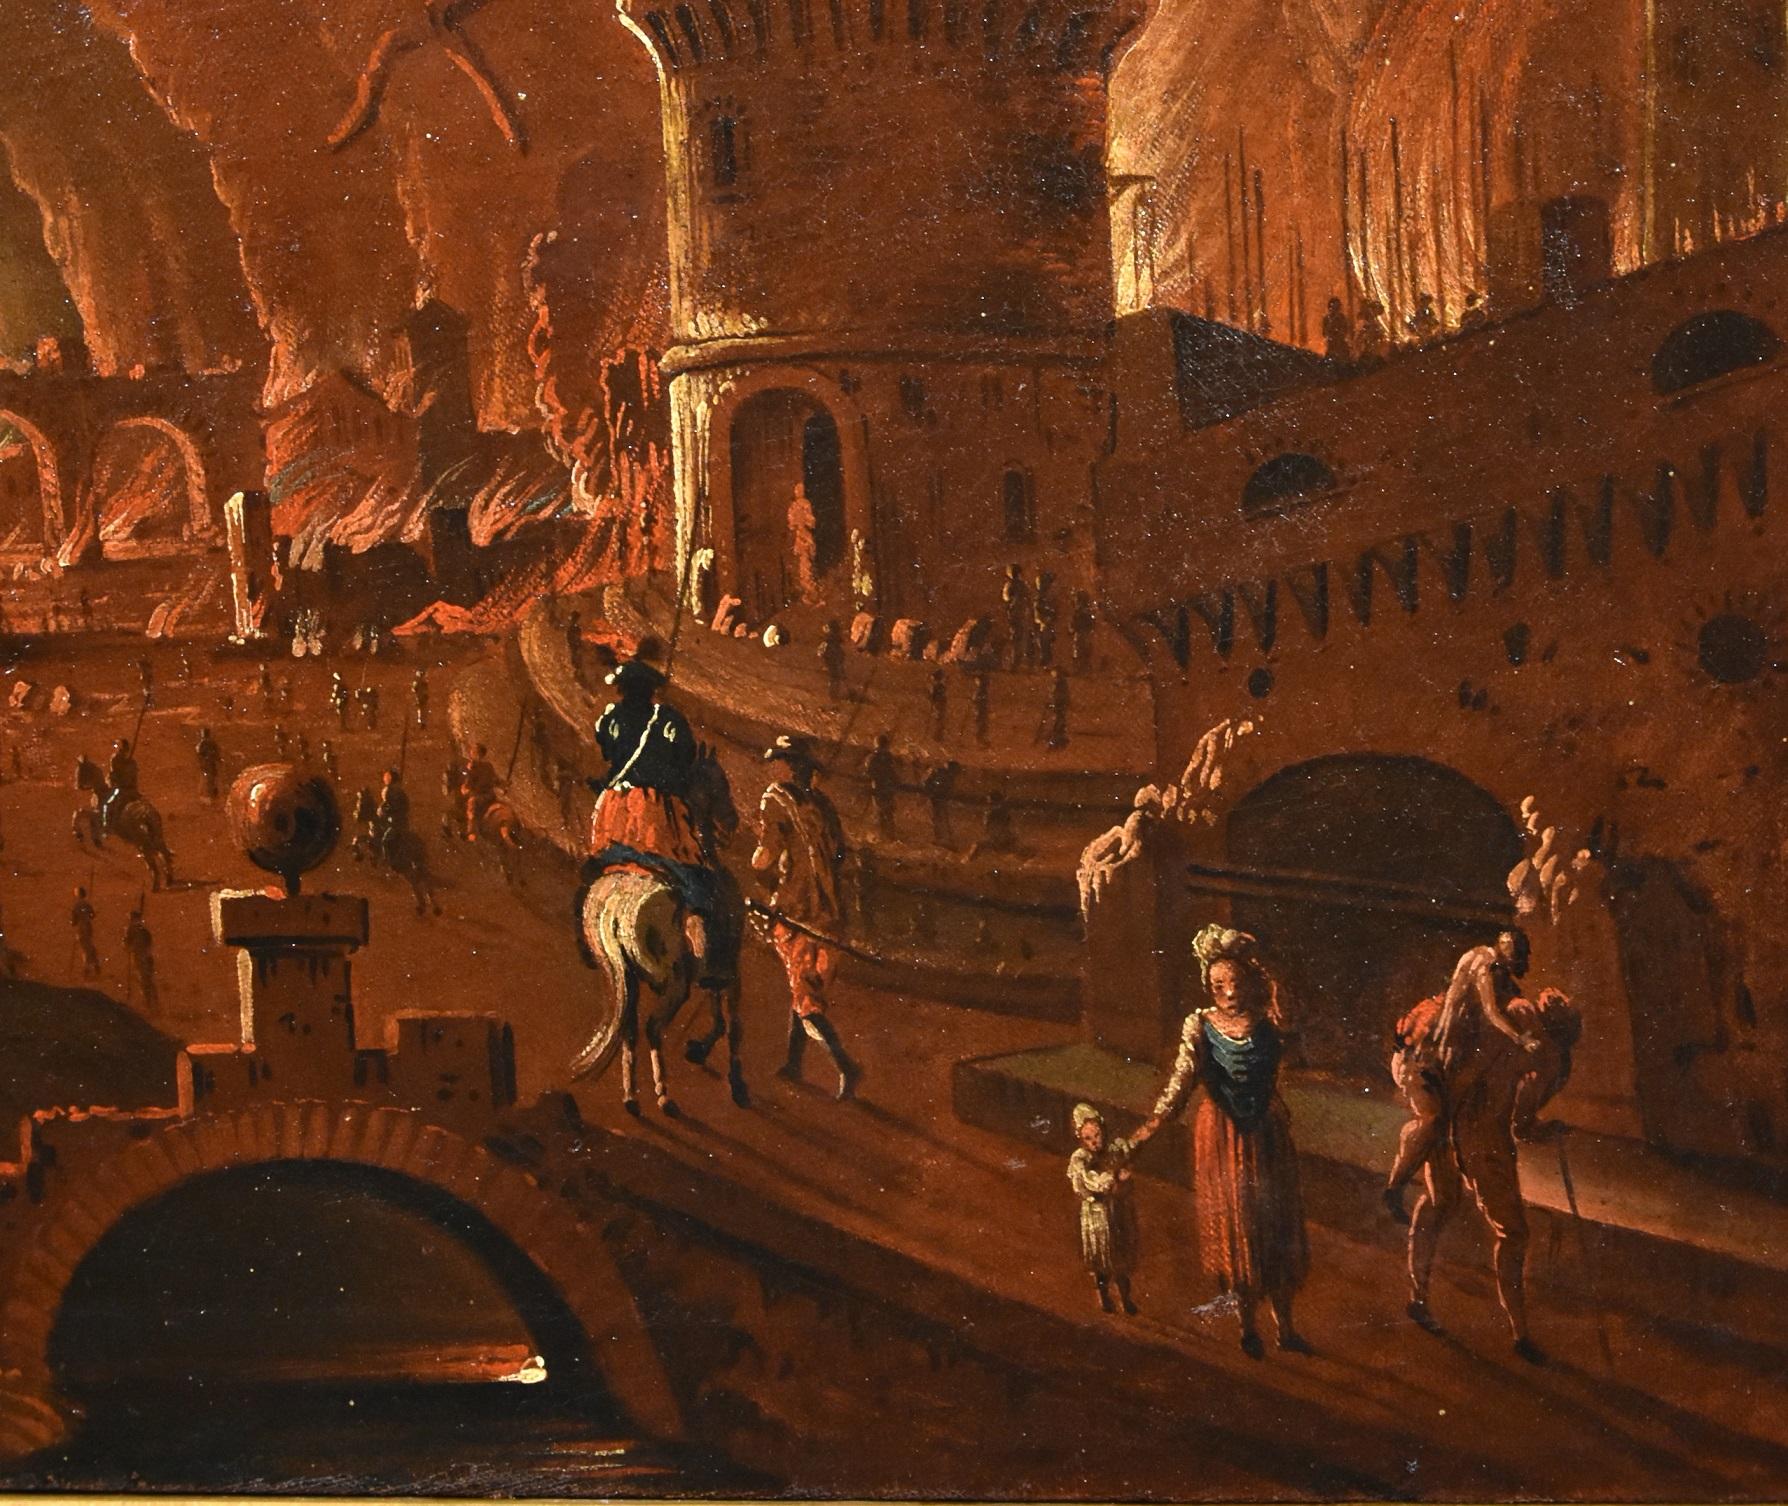 The fire of Troy with Aeneas and his father Anchises
Circle of Alessio de Marchis (Naples, 1684 - Perugia, 1752)

Oil painting on canvas
cm. 61 x 87, in frame cm. 78 x 105

The canvas proposed here, dating back to around the mid-eighteenth century,